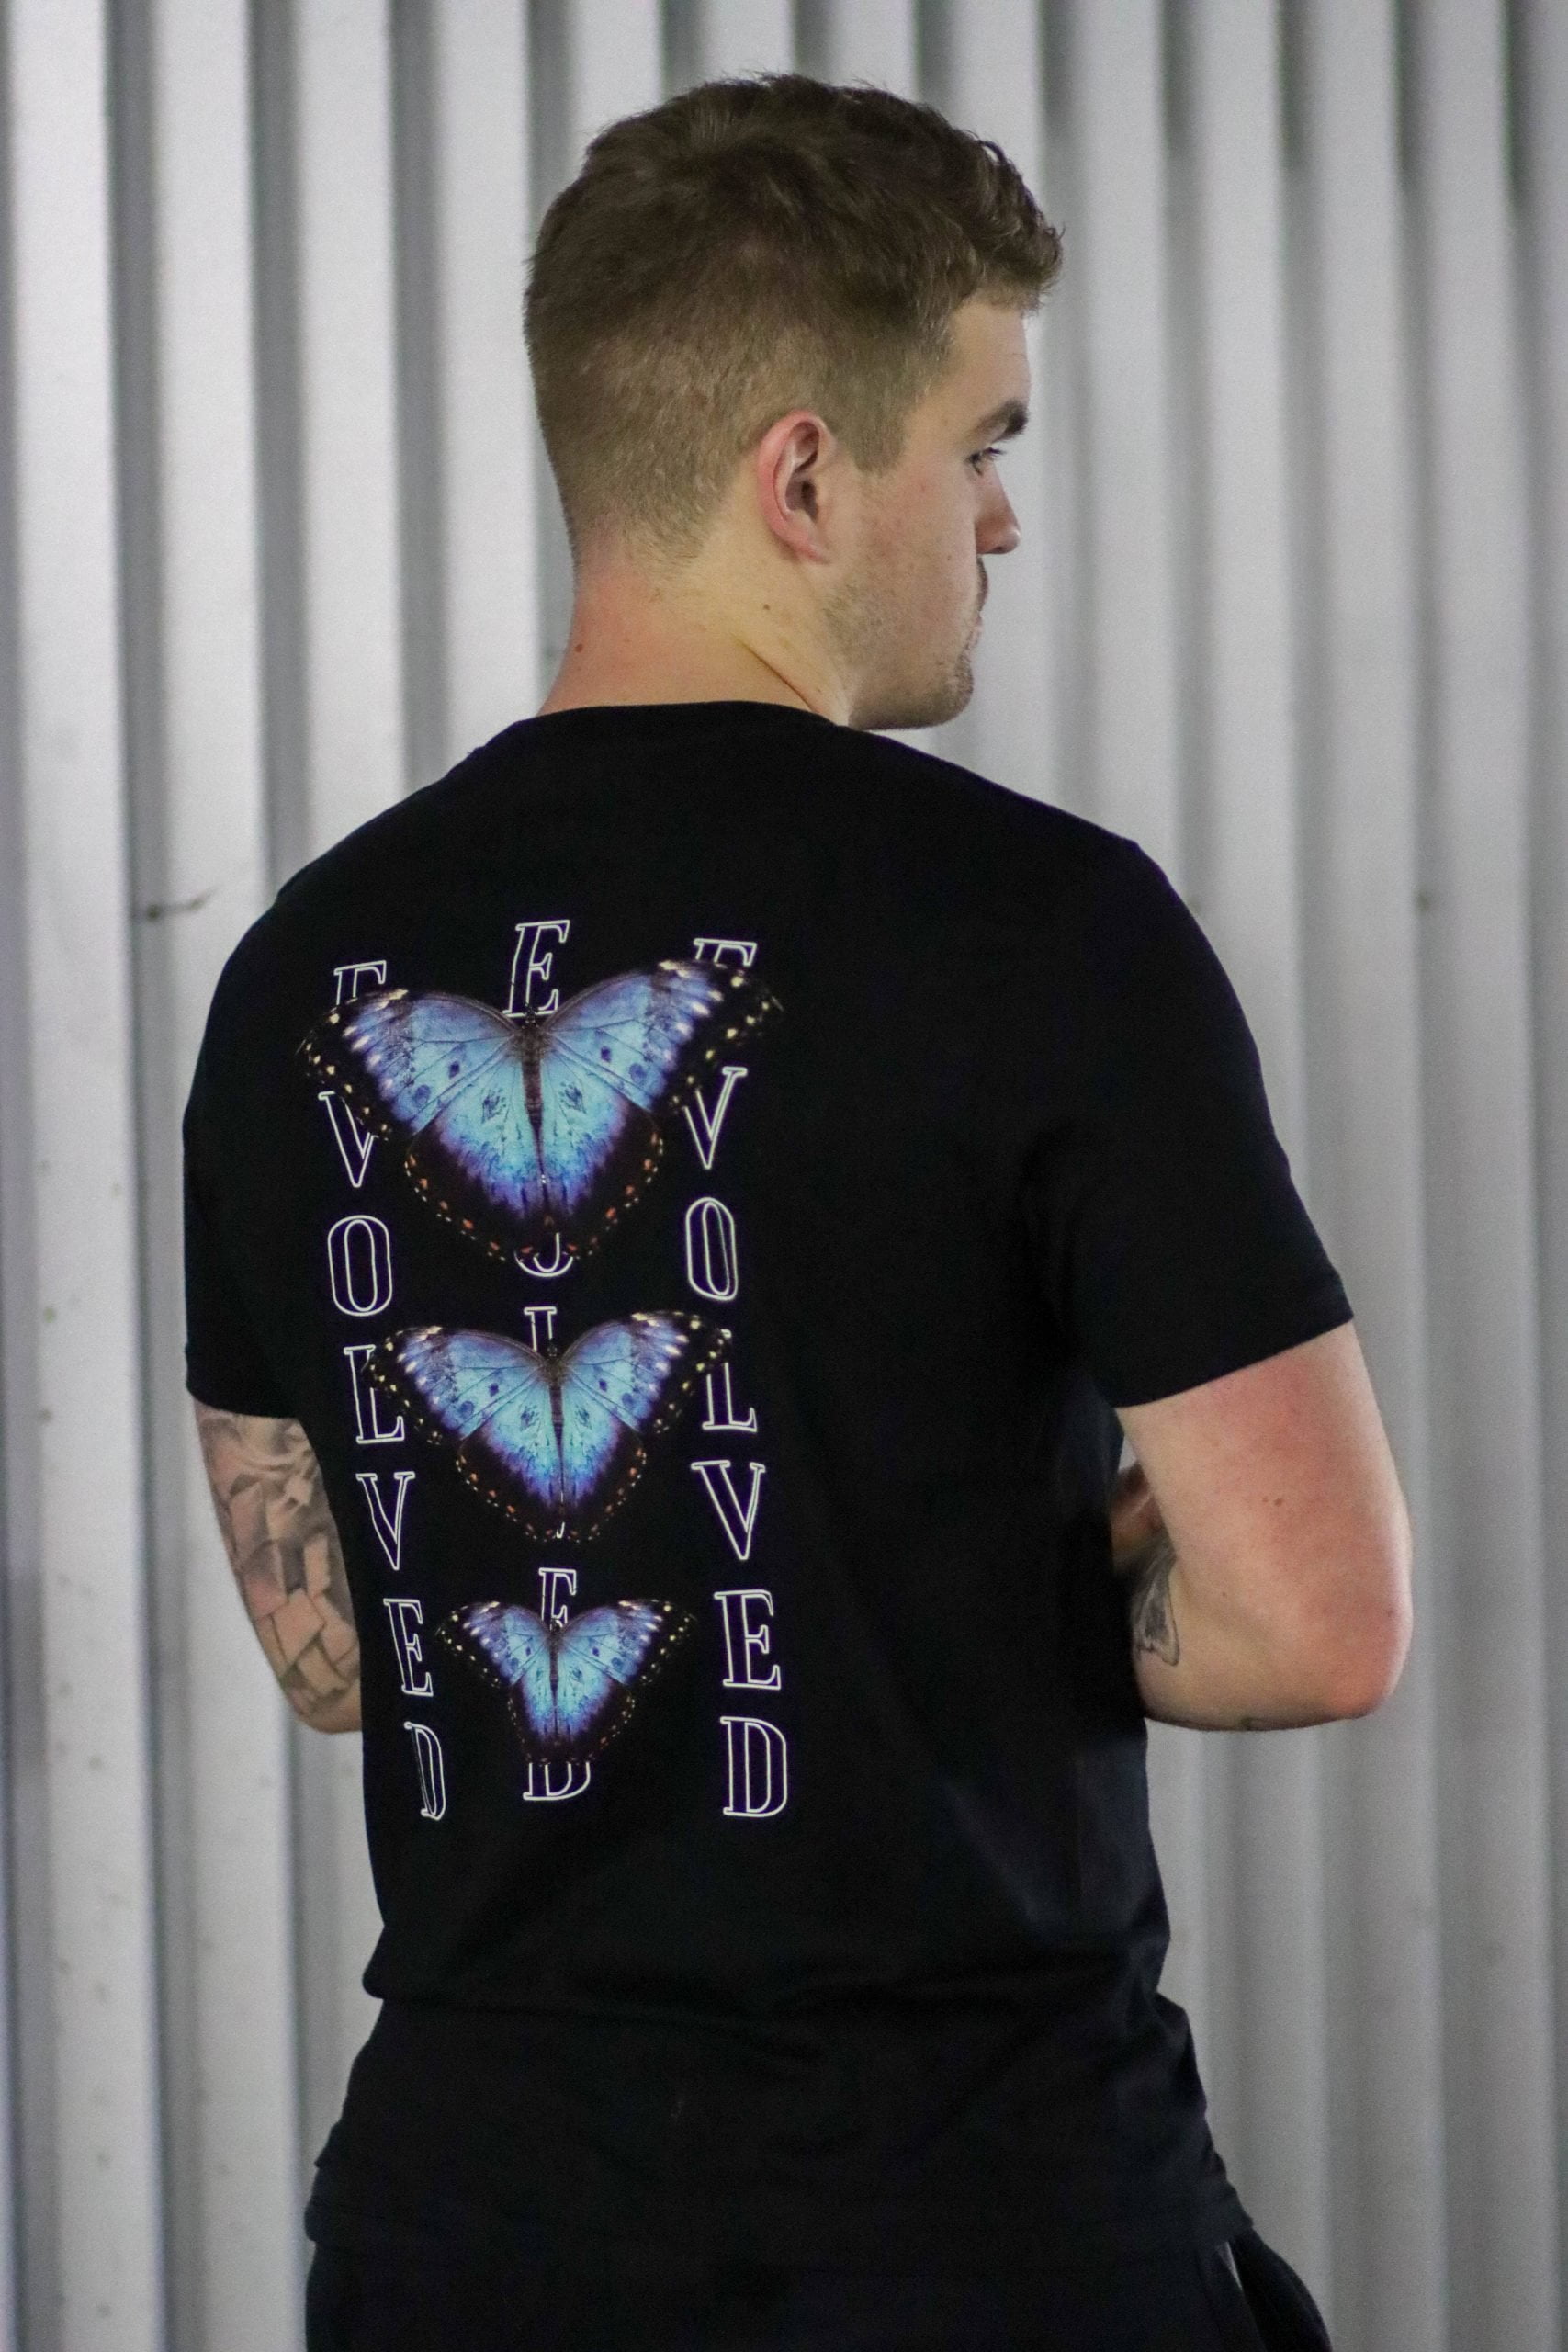 Evolved butterfly back model cropped ratio 2x3